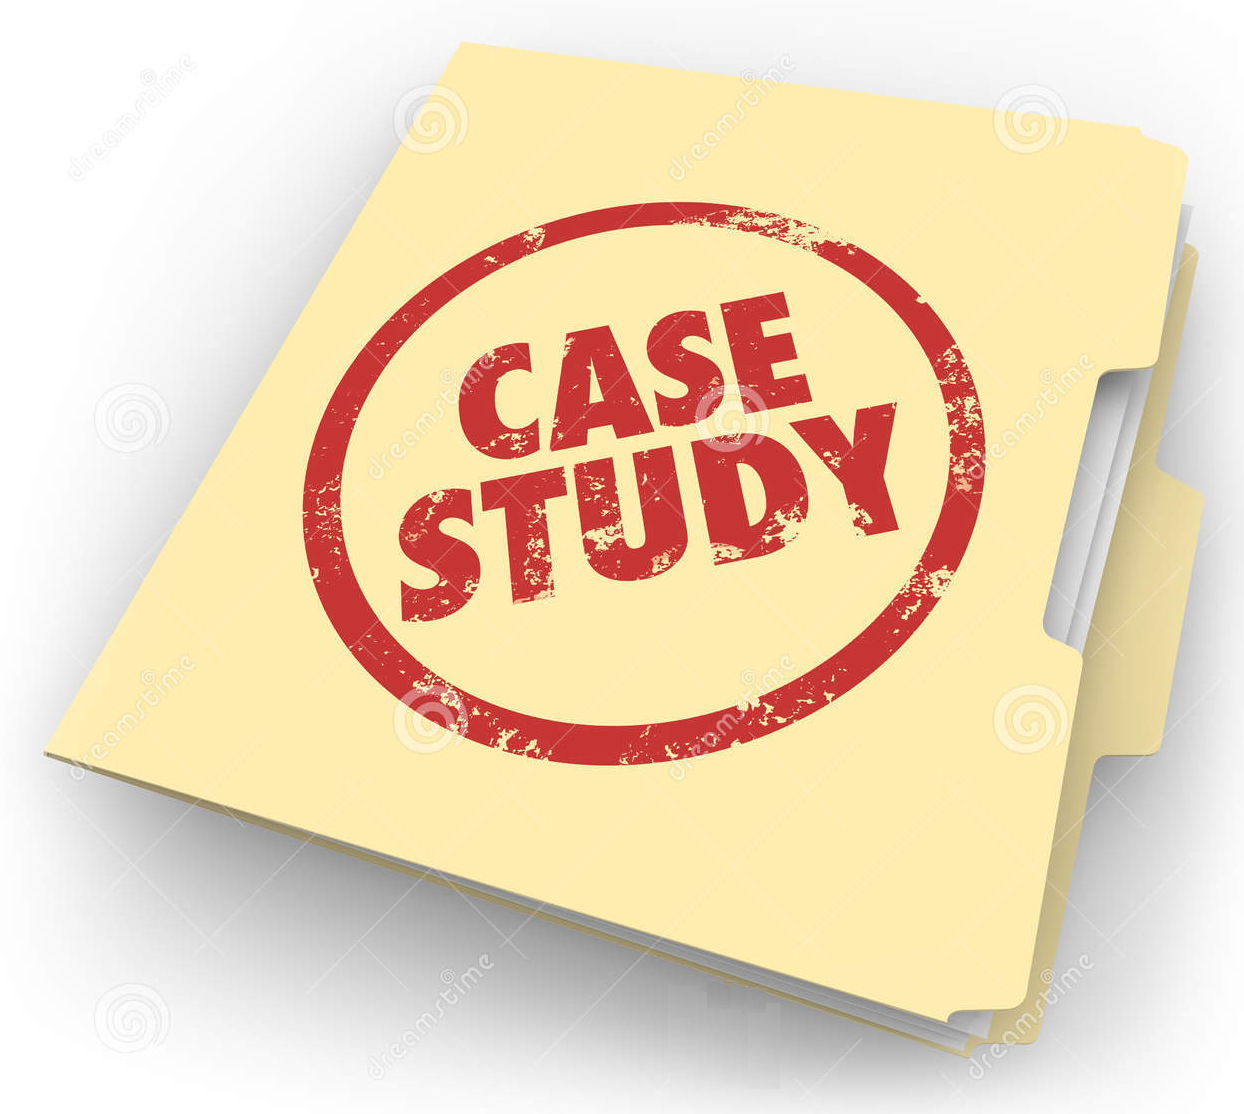 Case Presentation and Clinical Notes